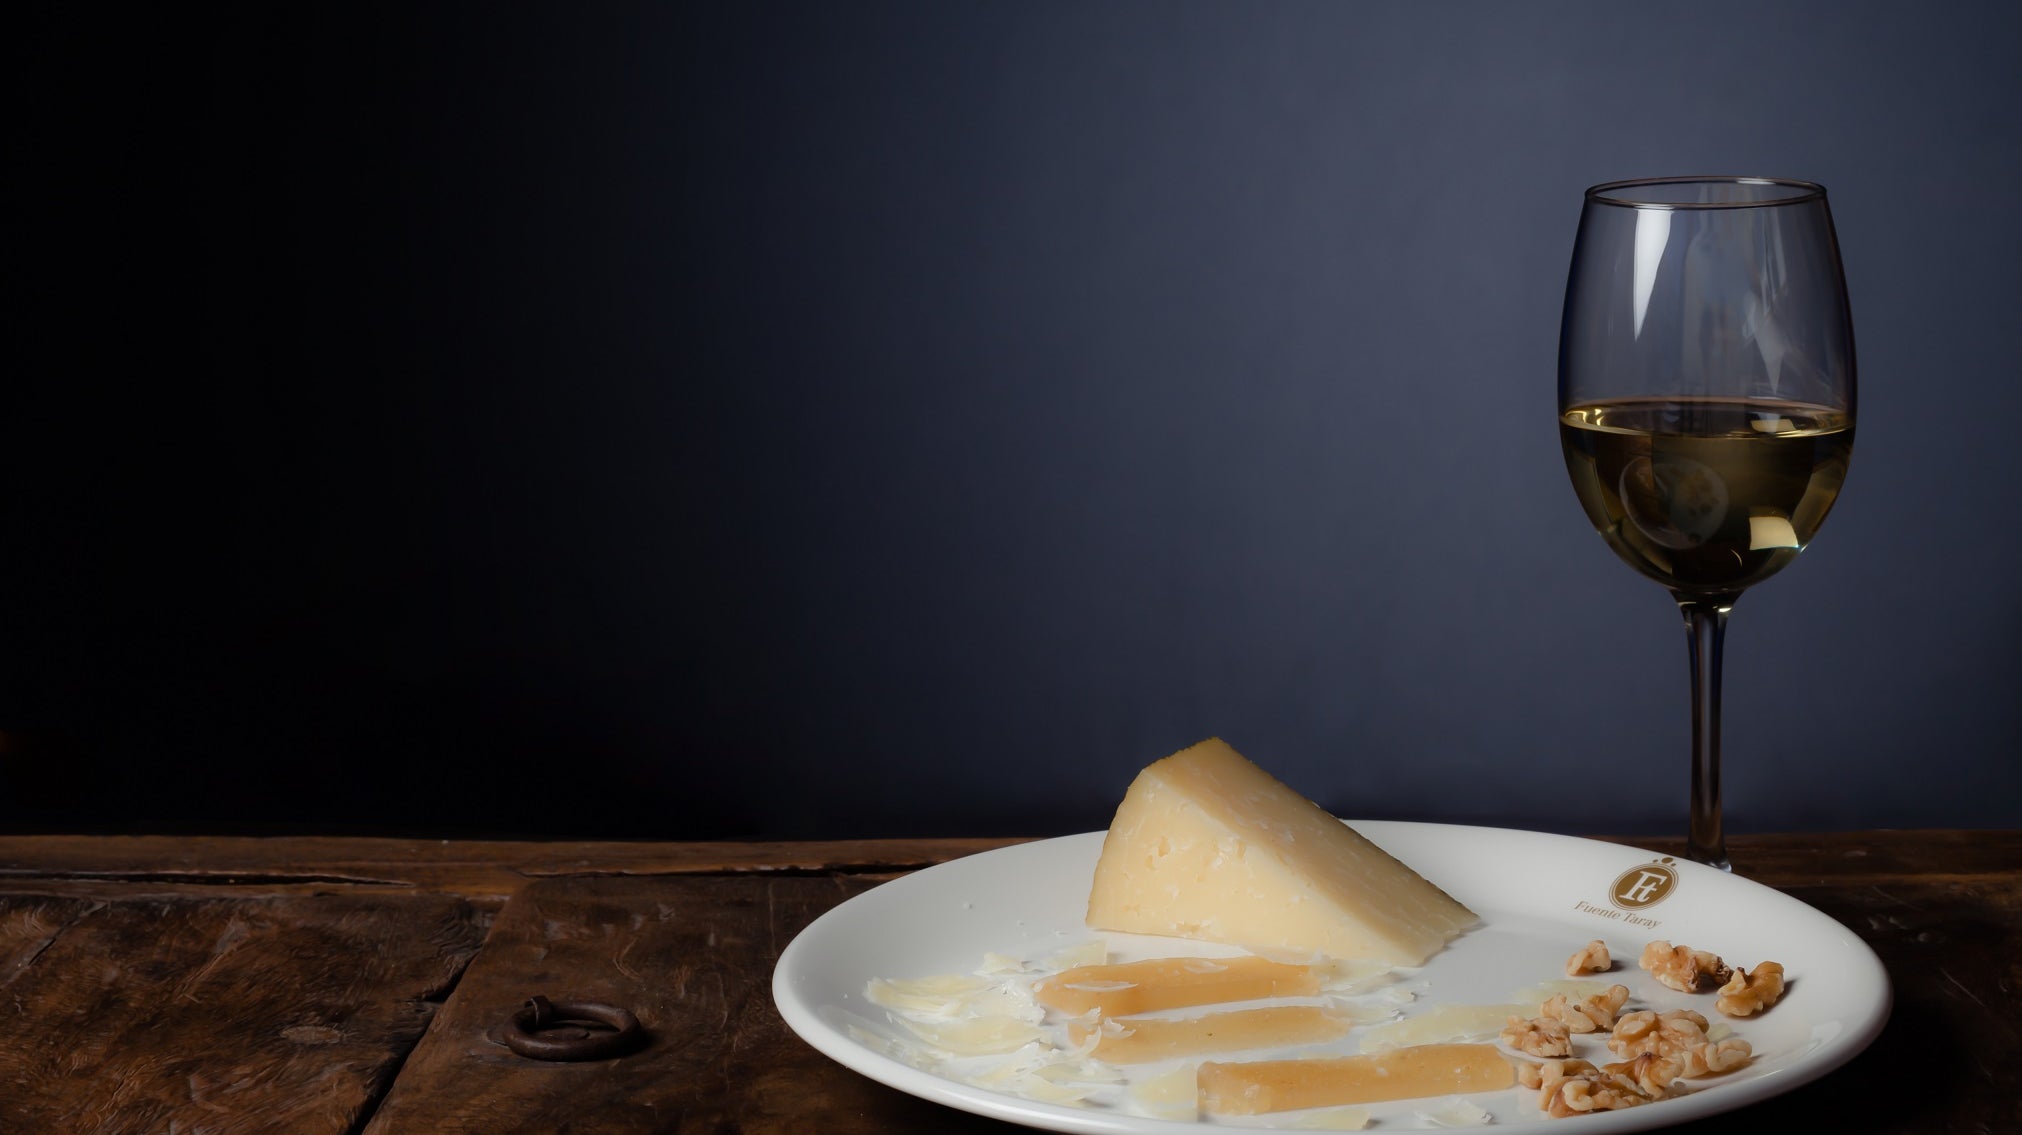 The Art of Pairing: Manchego Cheese and Wine